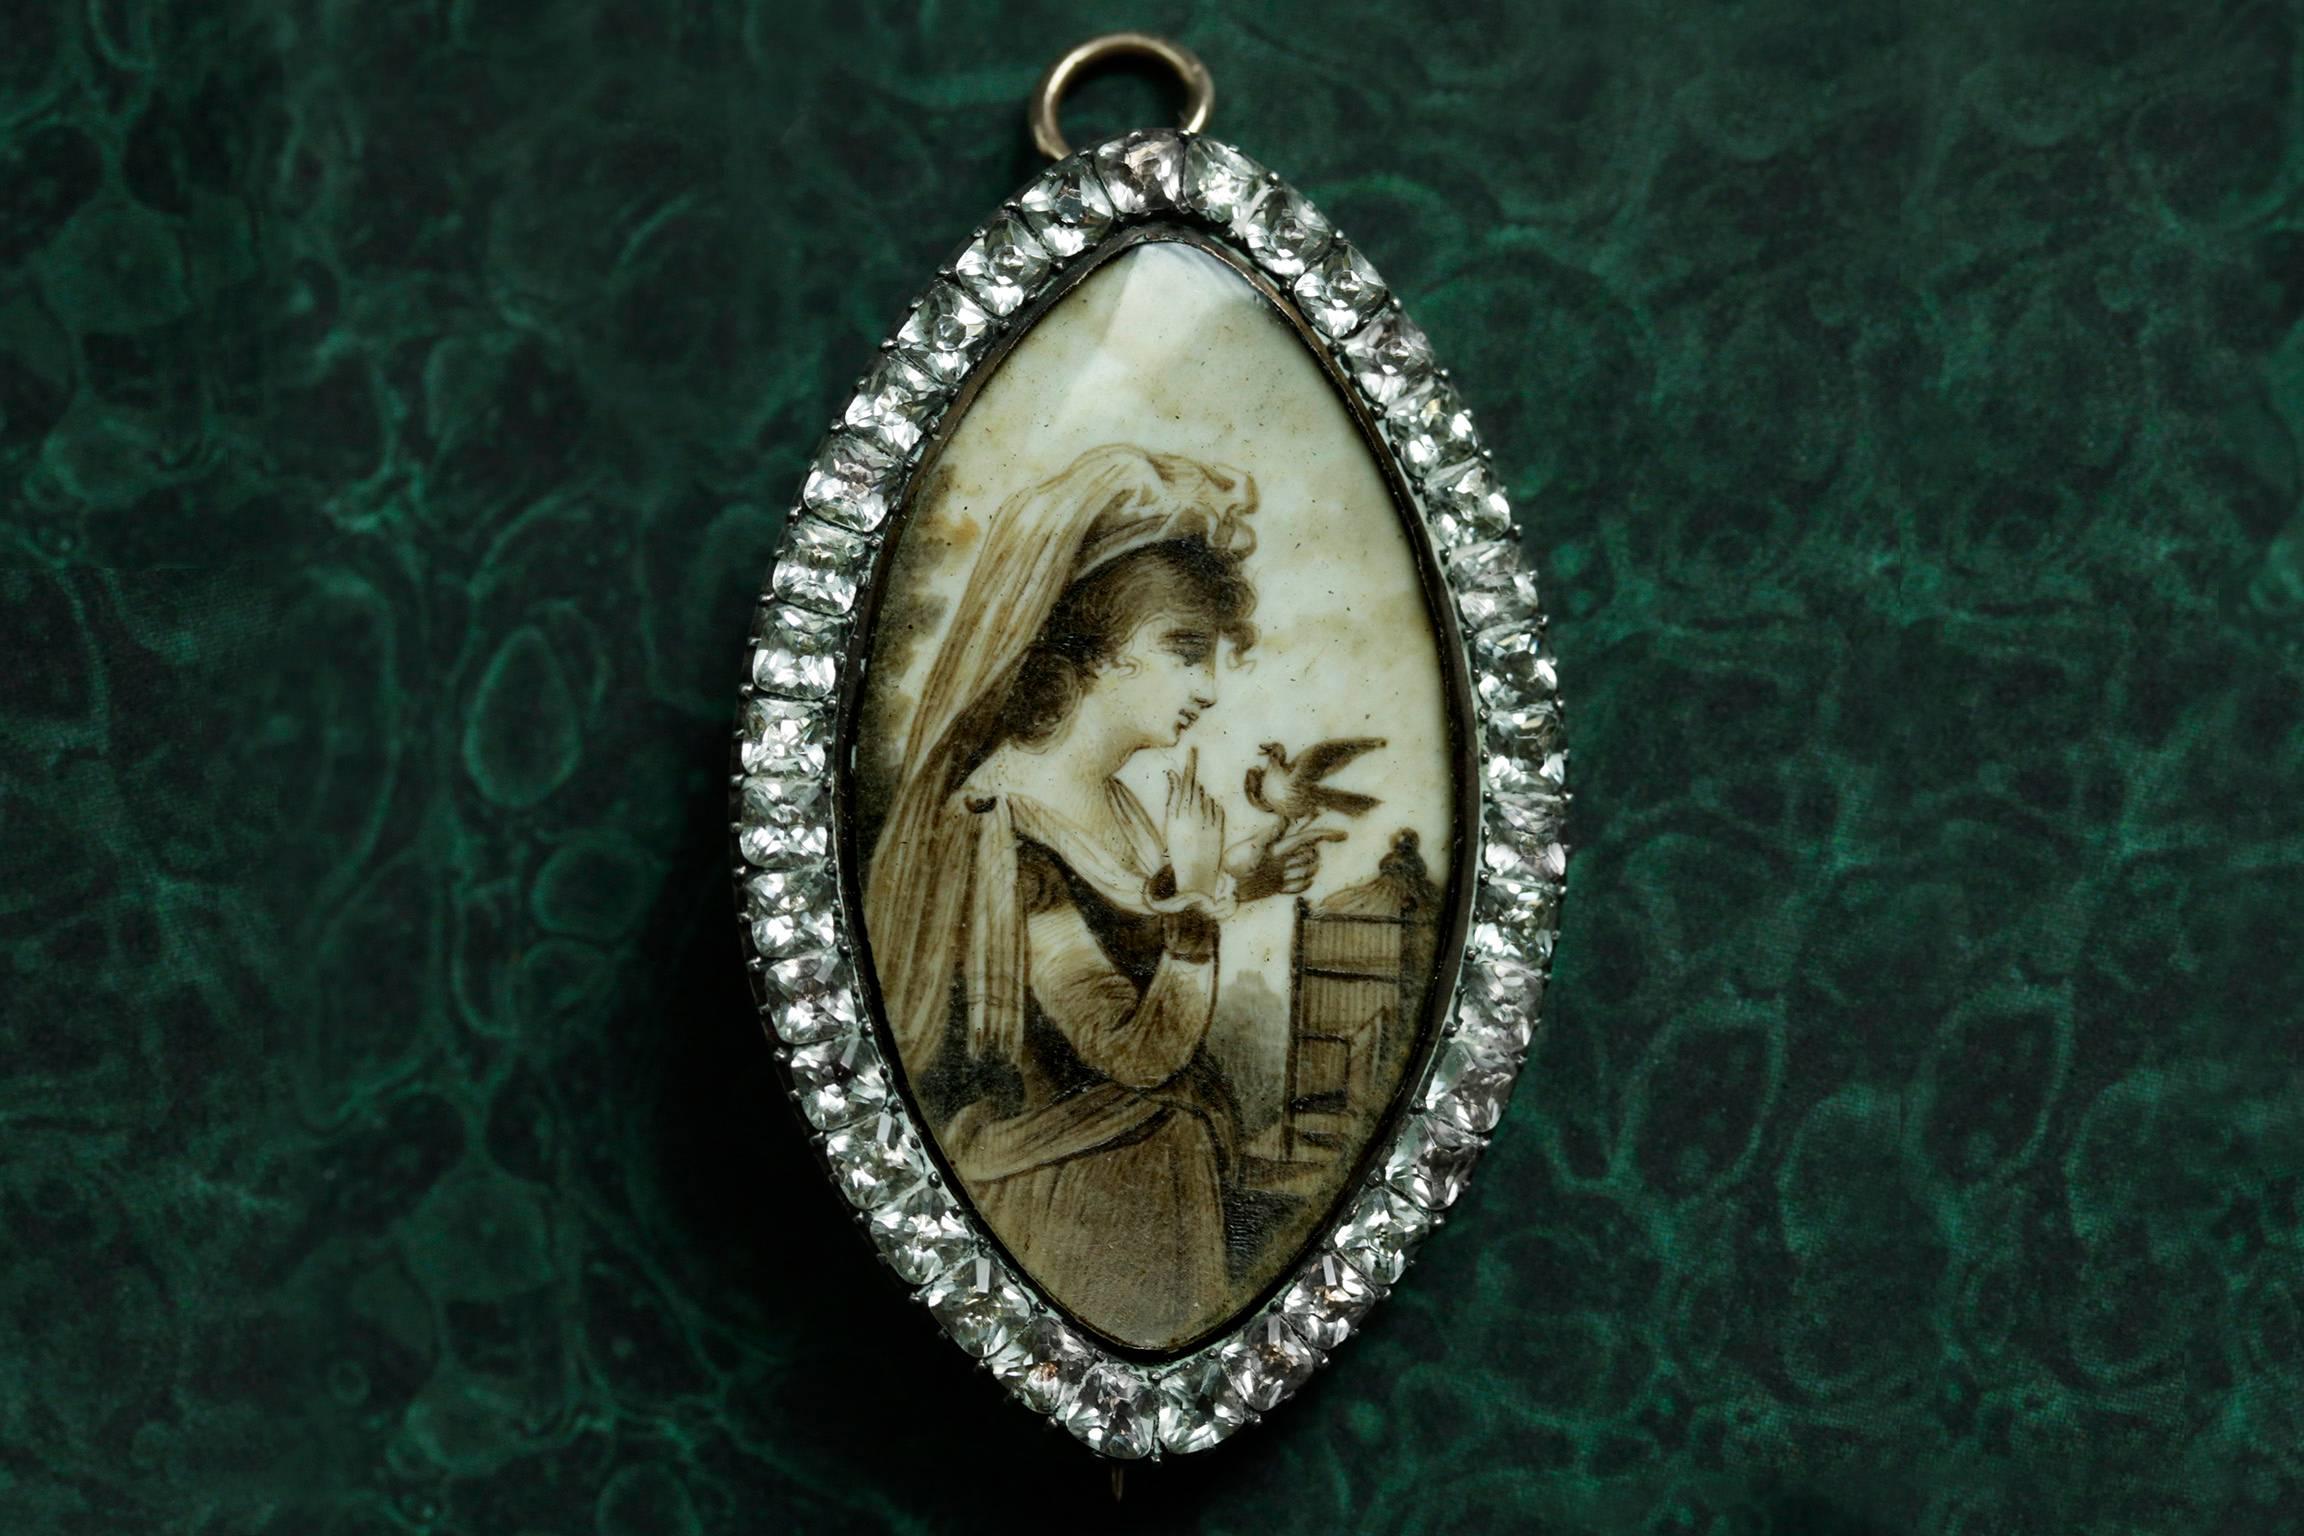 C.1780-1800. A gorgeous late 18th century sepia miniature pin/pendant. The finely executed sizable navette-shaped miniature painting depicts a young lady gently holding a dove released from its cage. A dove symbolizes peace or holy spirit. The pin